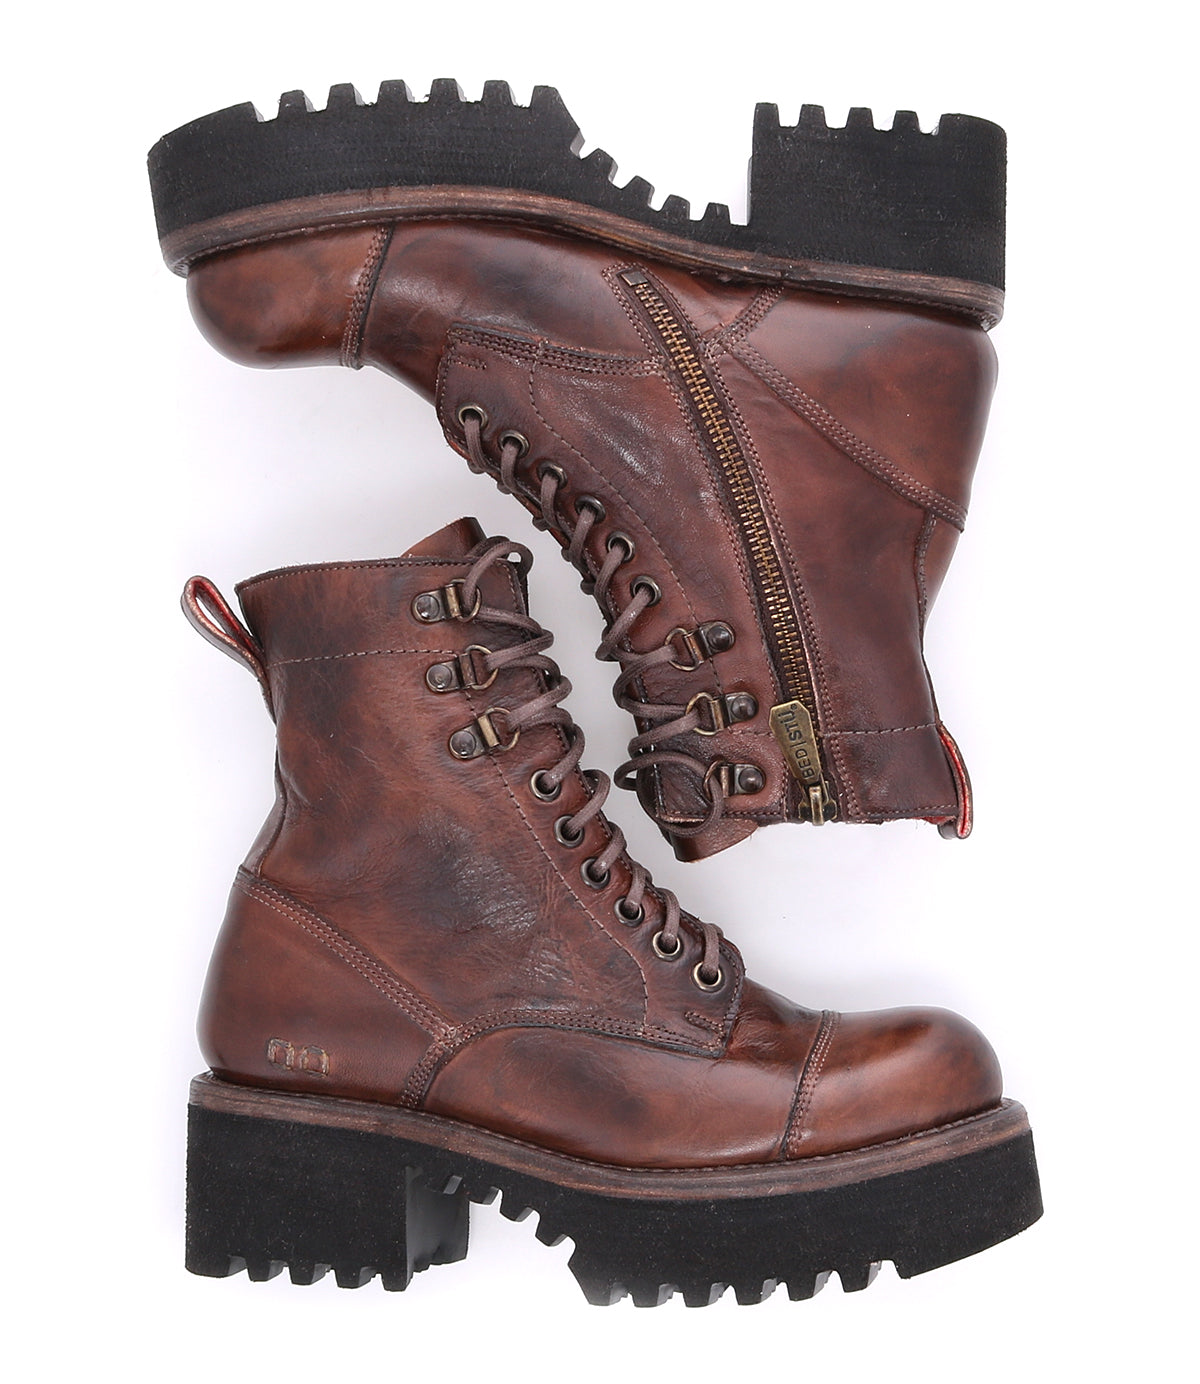 A pair of Bed Stu Prudence Hi leather combat boots with a platform outsole.